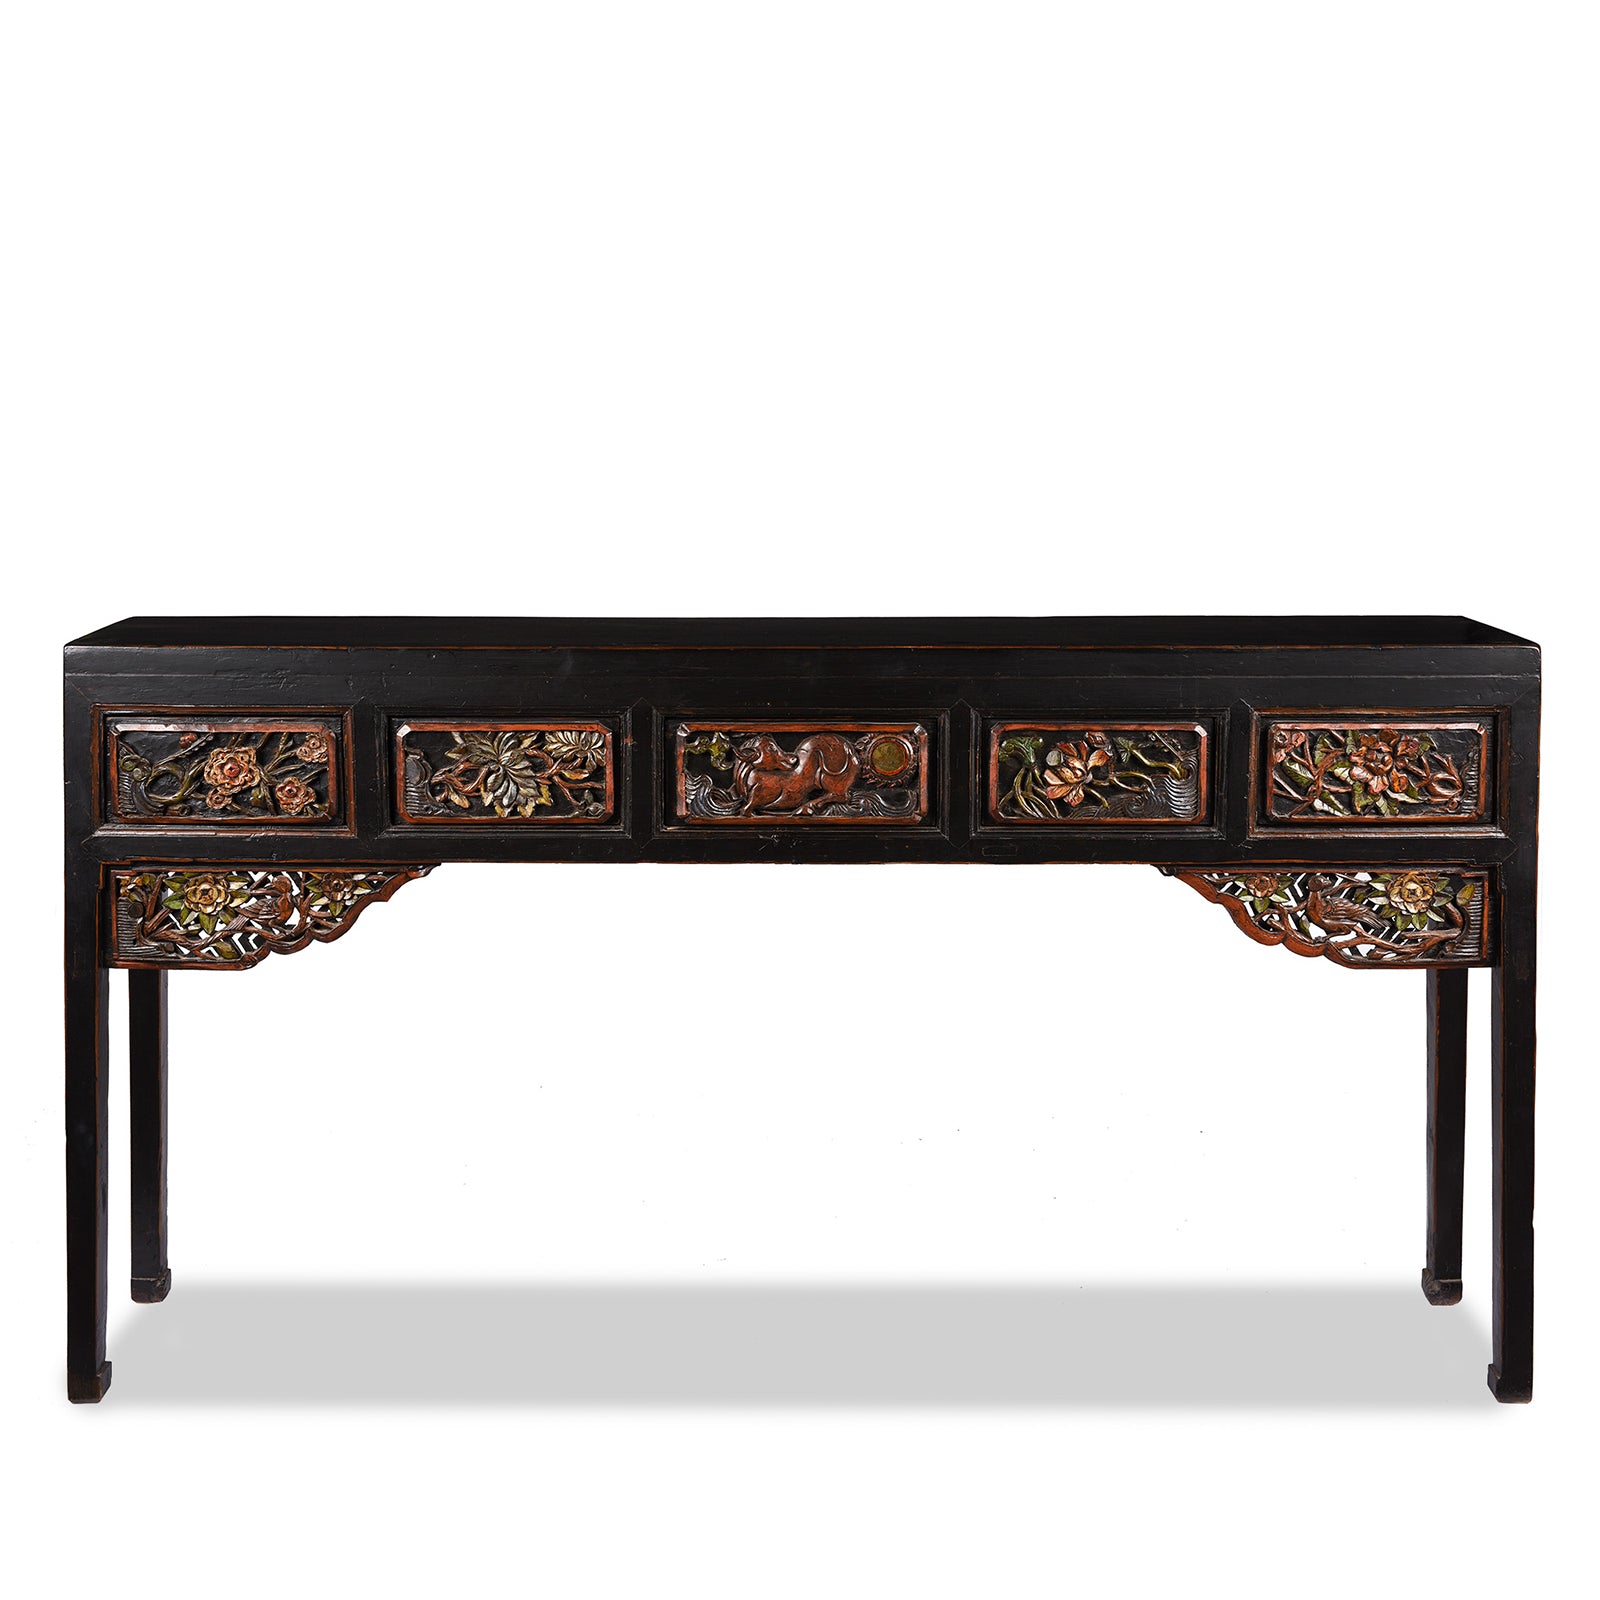 Antique Carved Black Lacquer Elm Altar Table From Gansu -19th Century | Indigo Antiques